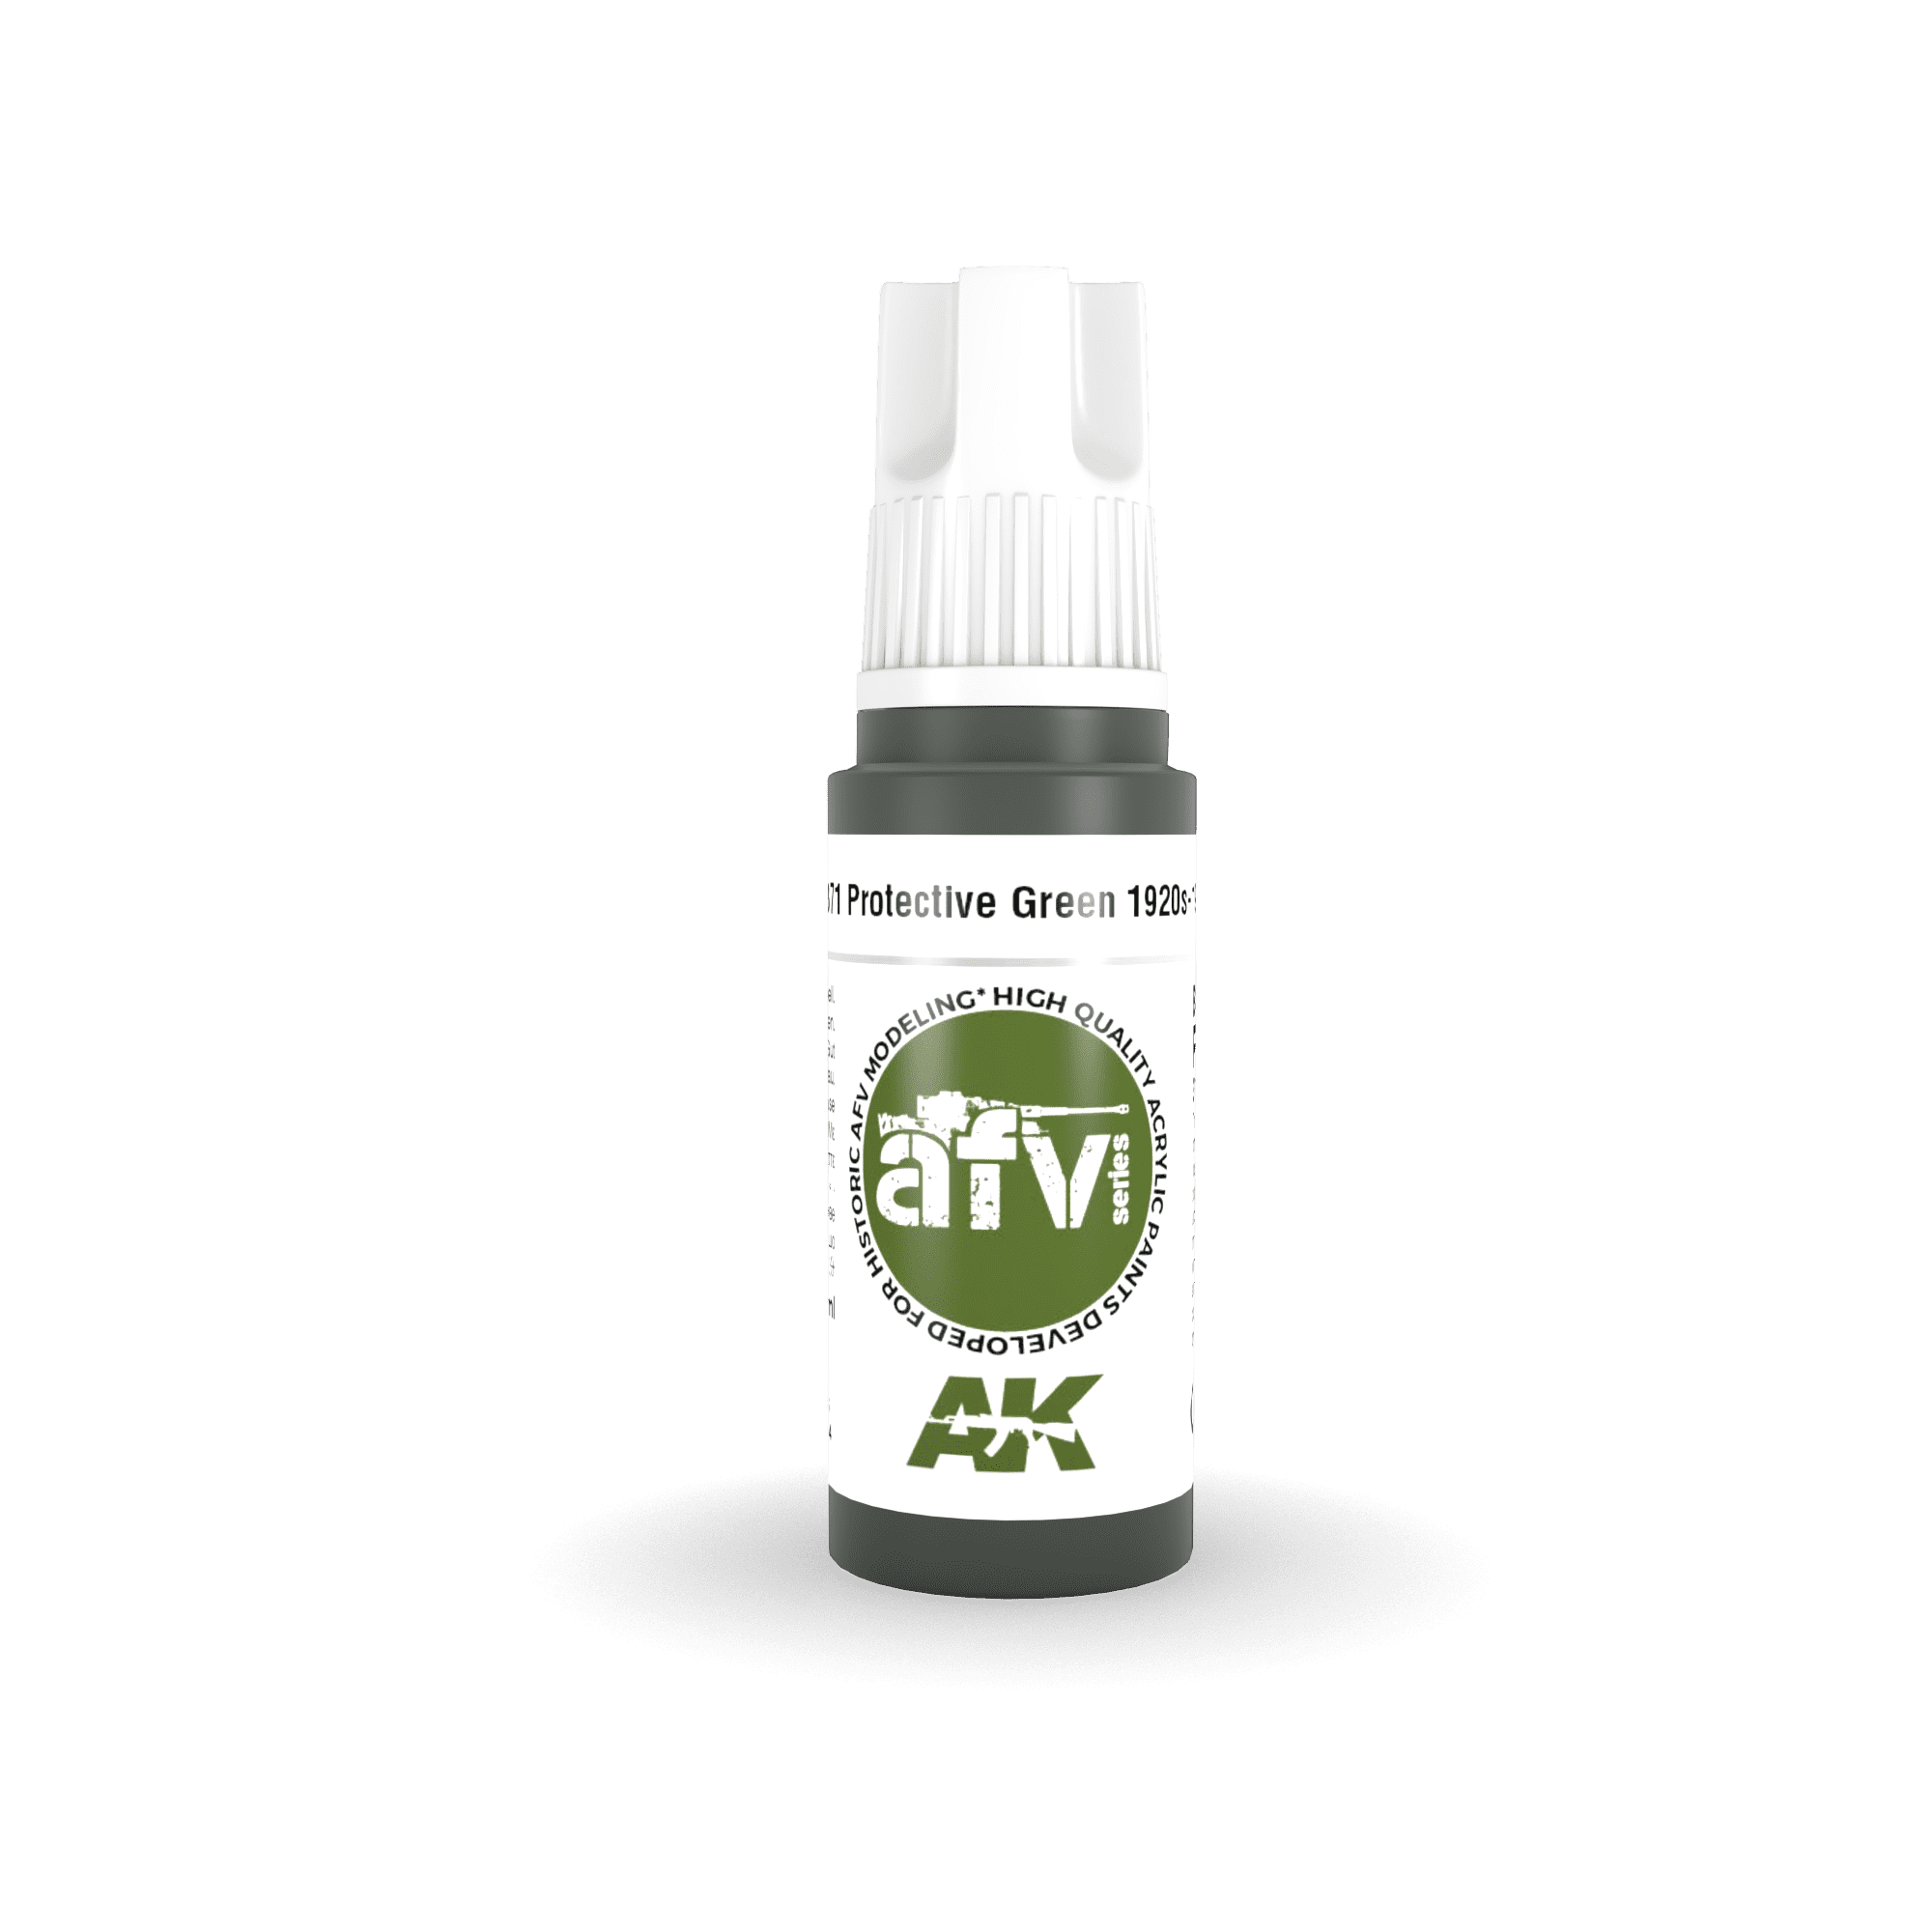 Protective Green 1920s-1930s – AFV